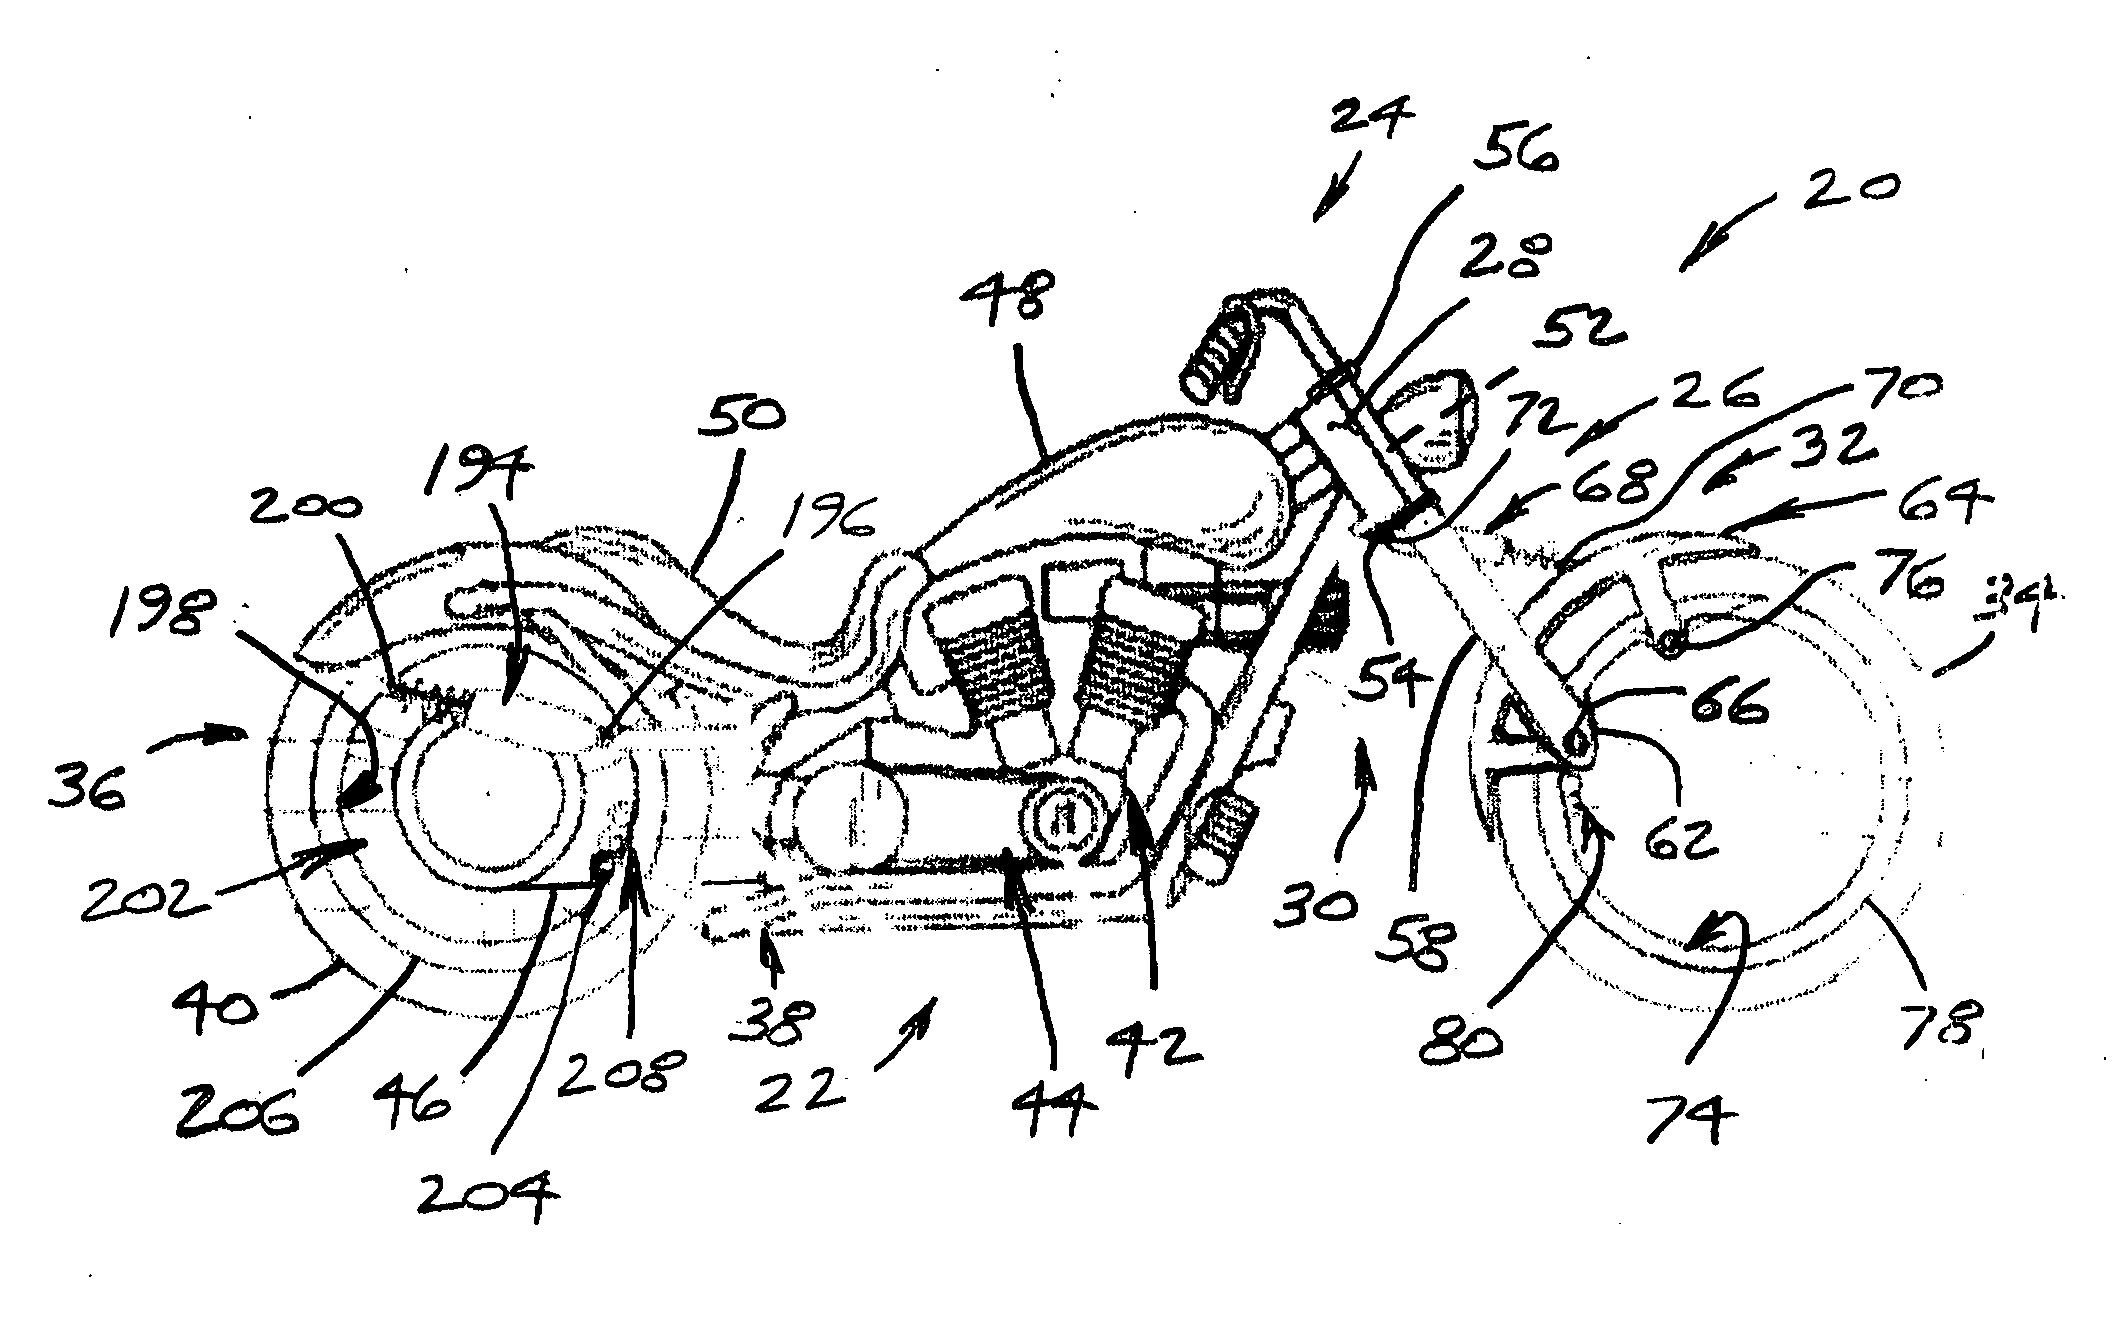 Motorcycle with suspension system that utilizes hubless wheels